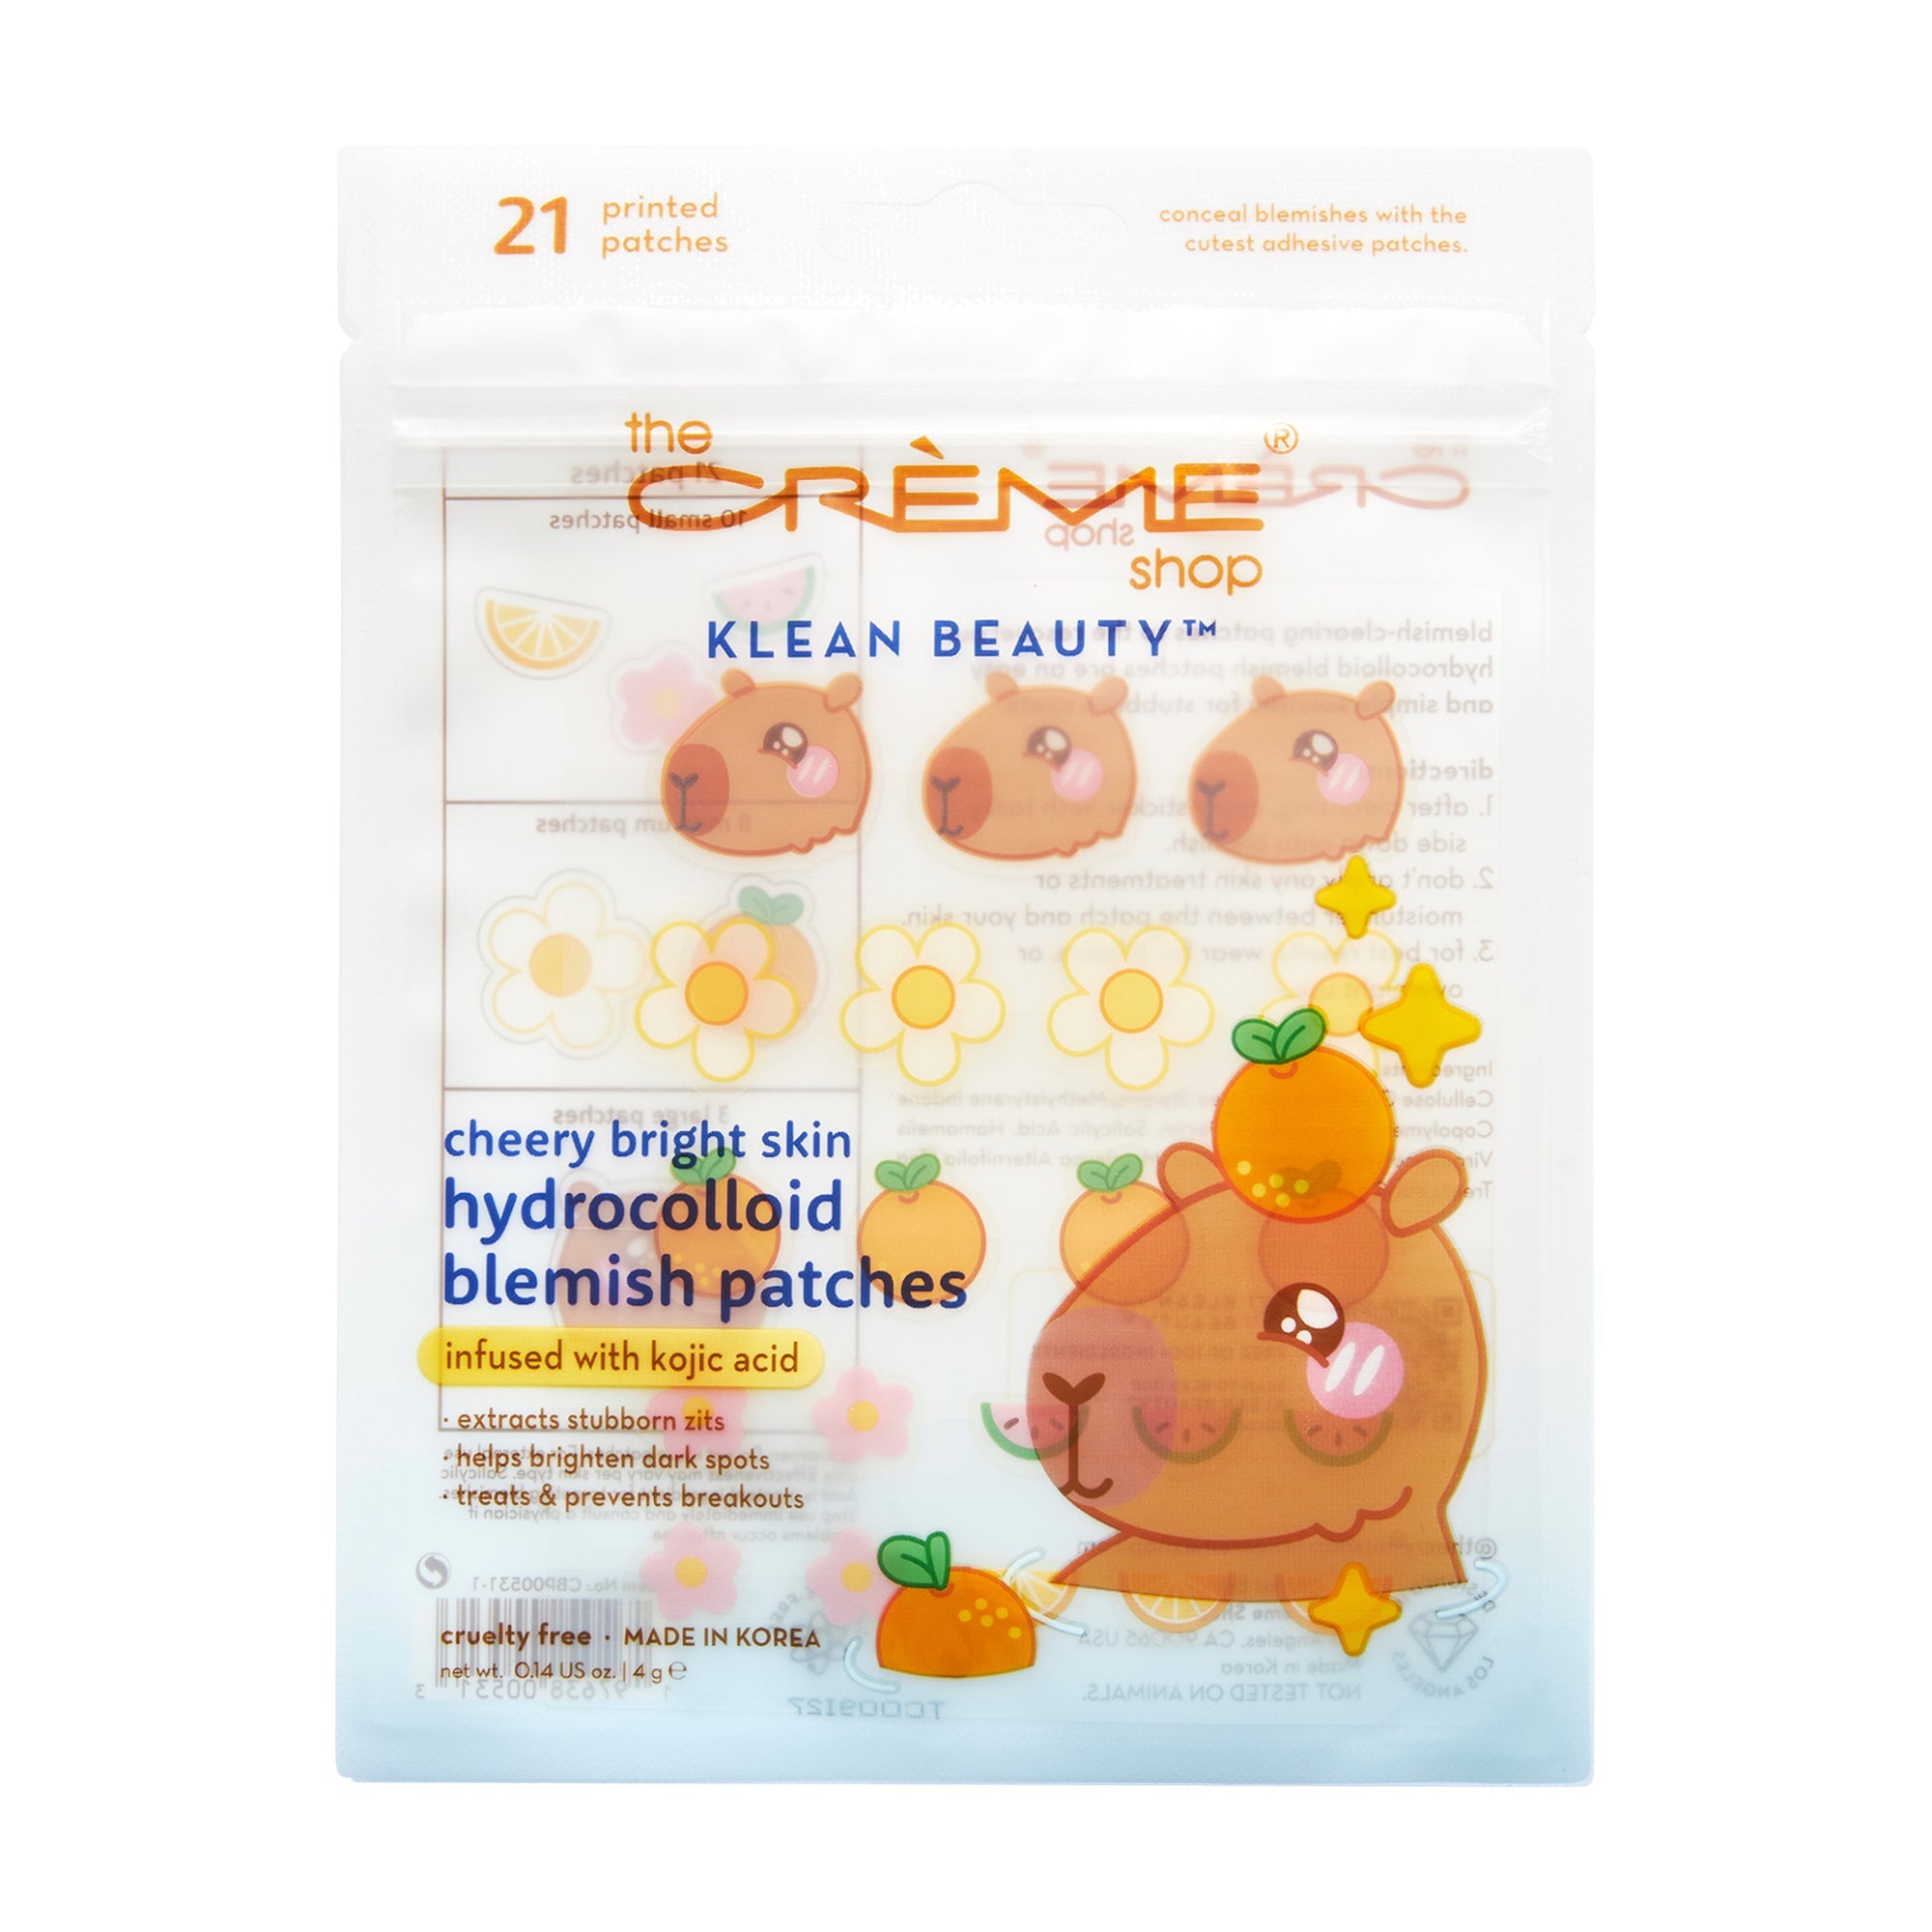 Cheery Bright Skin - Capybara Klean Beauty™ Blemish Patches Sheet Mask The Crème Shop Single 